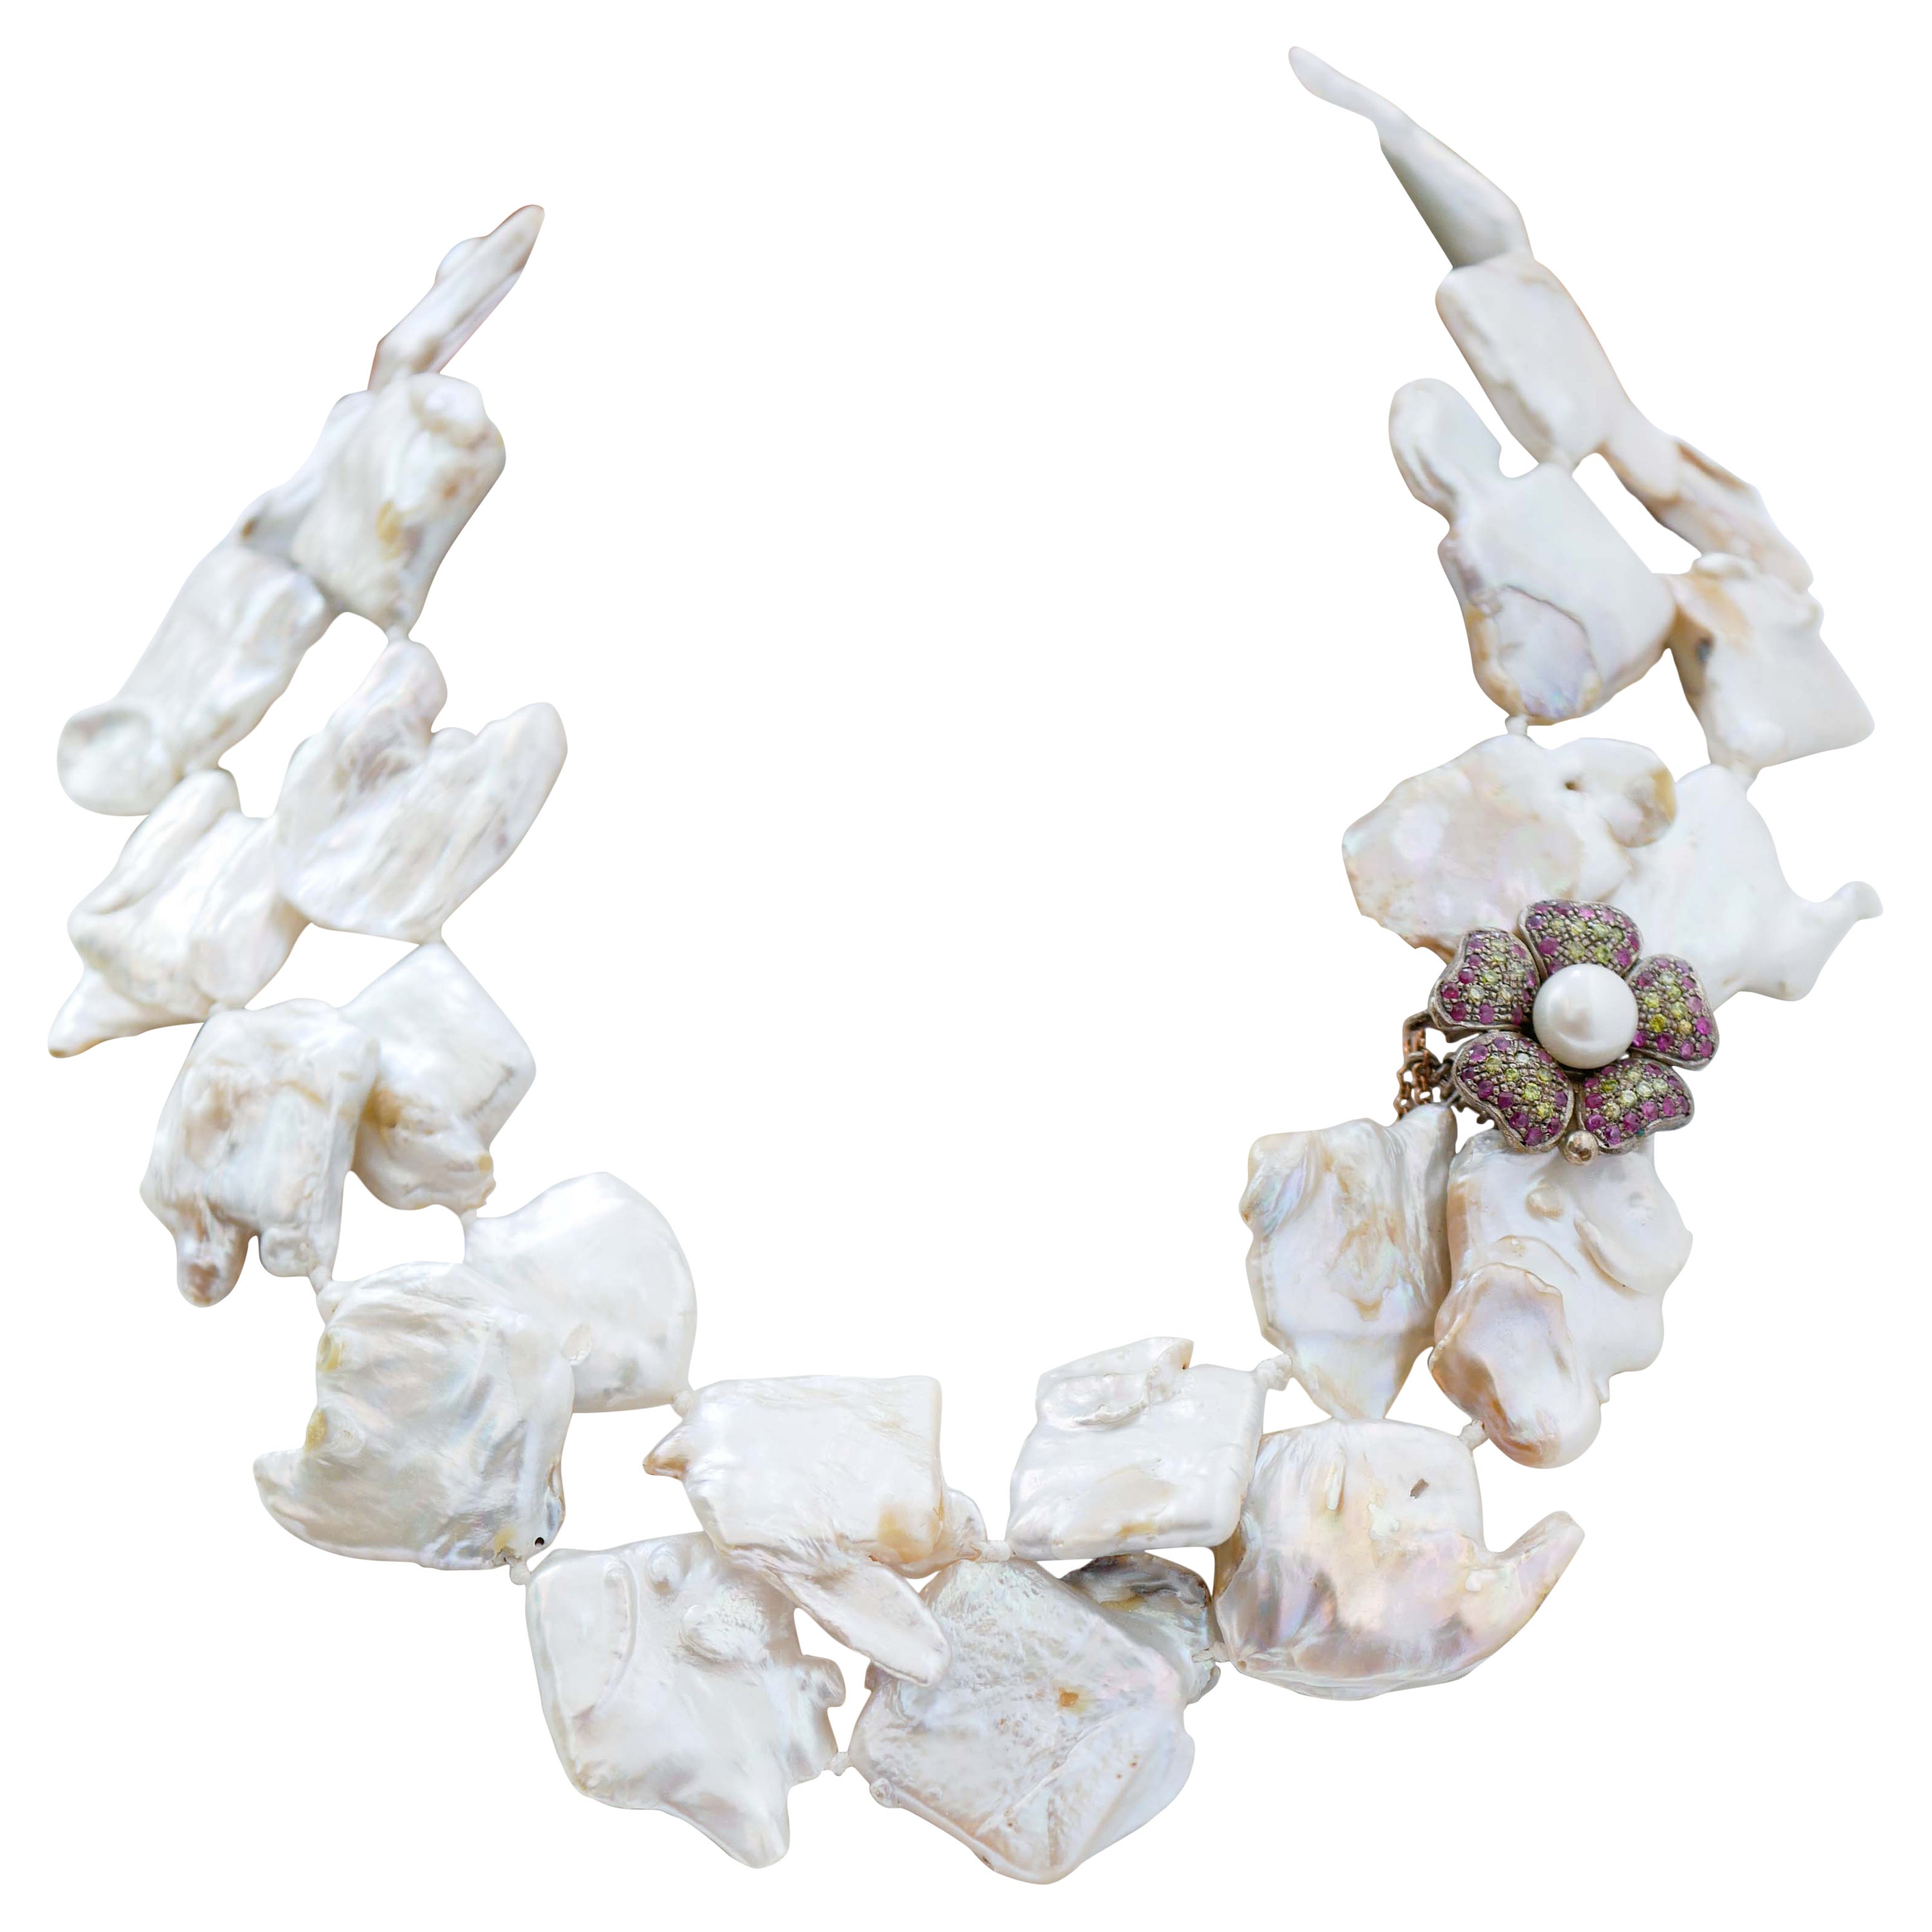 Baroque Pearls, Rubies, Stones, Rose Gold and Silver Retrò Necklace For Sale